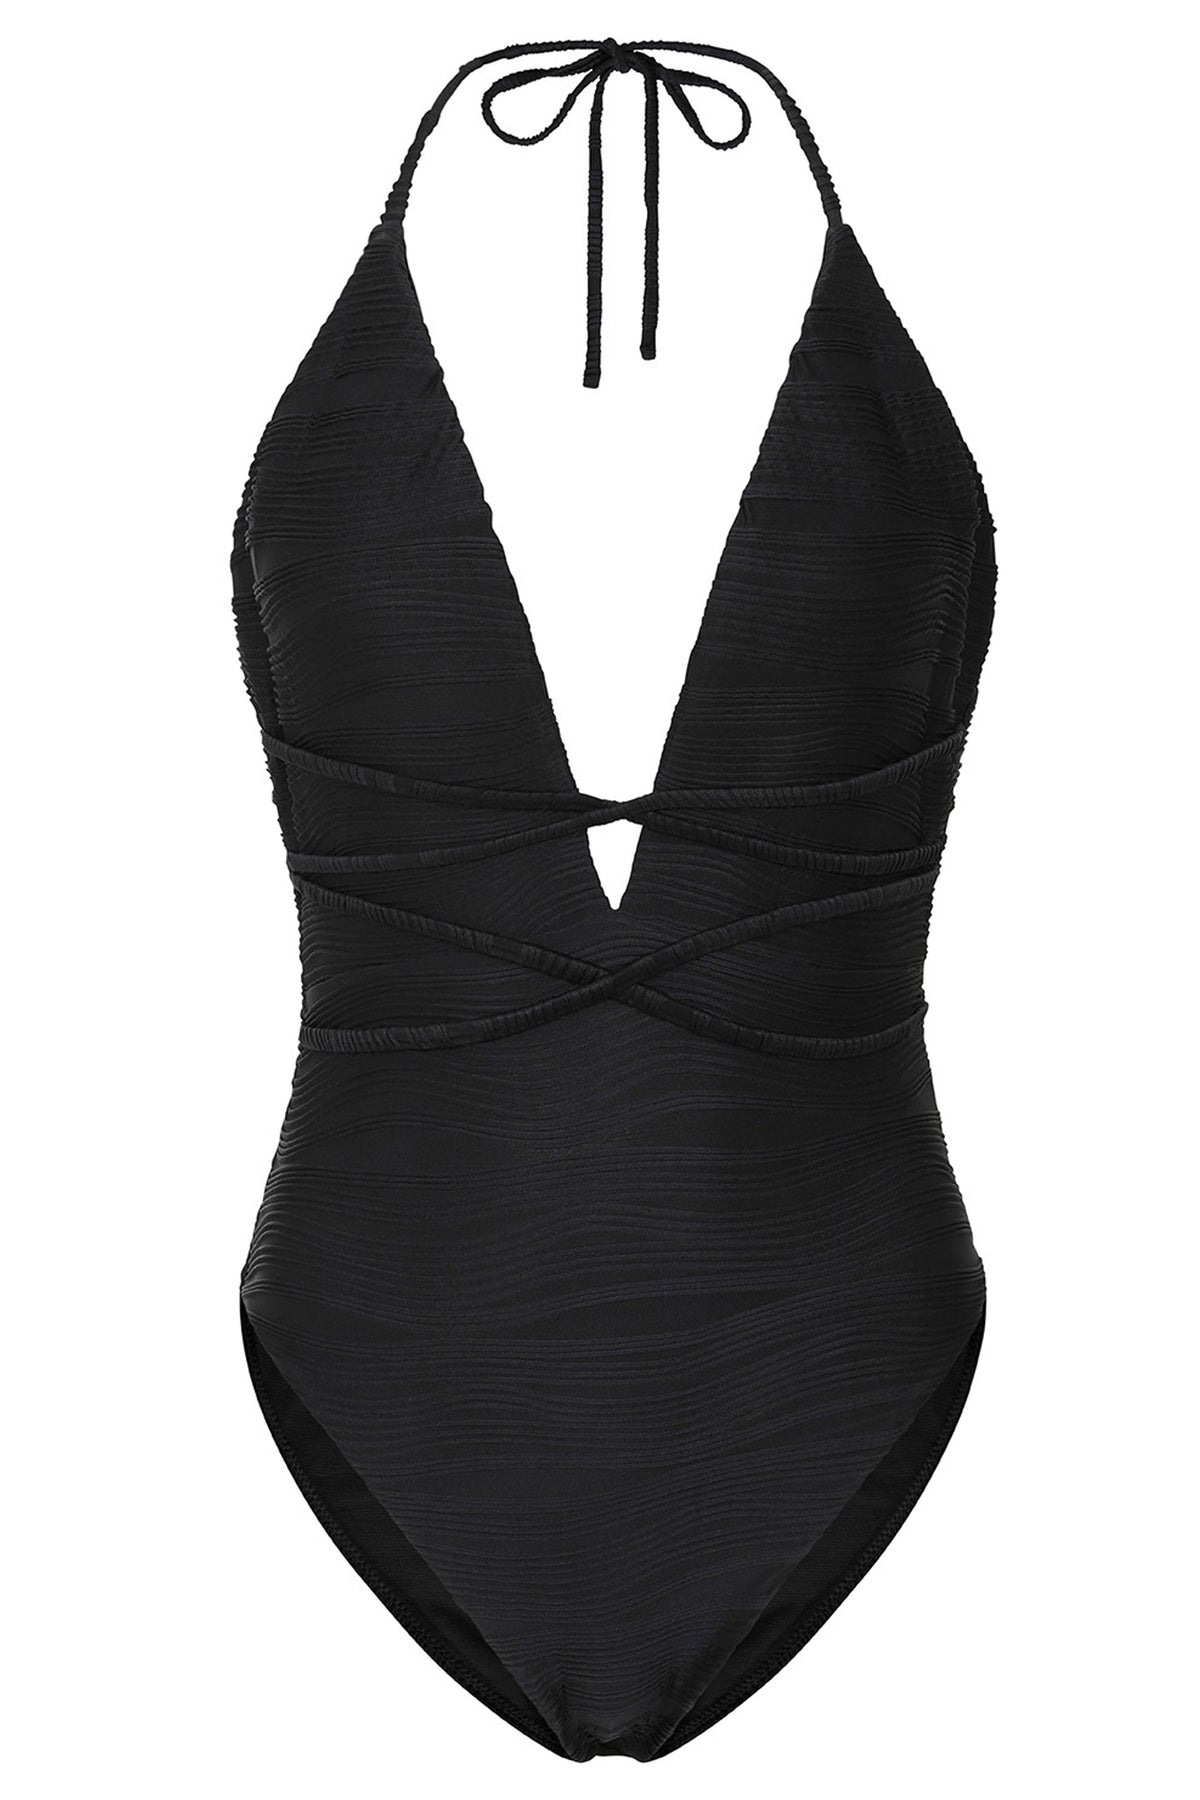 Shipwrecked Black Textured Plunging Swimsuit – Club L London - UK